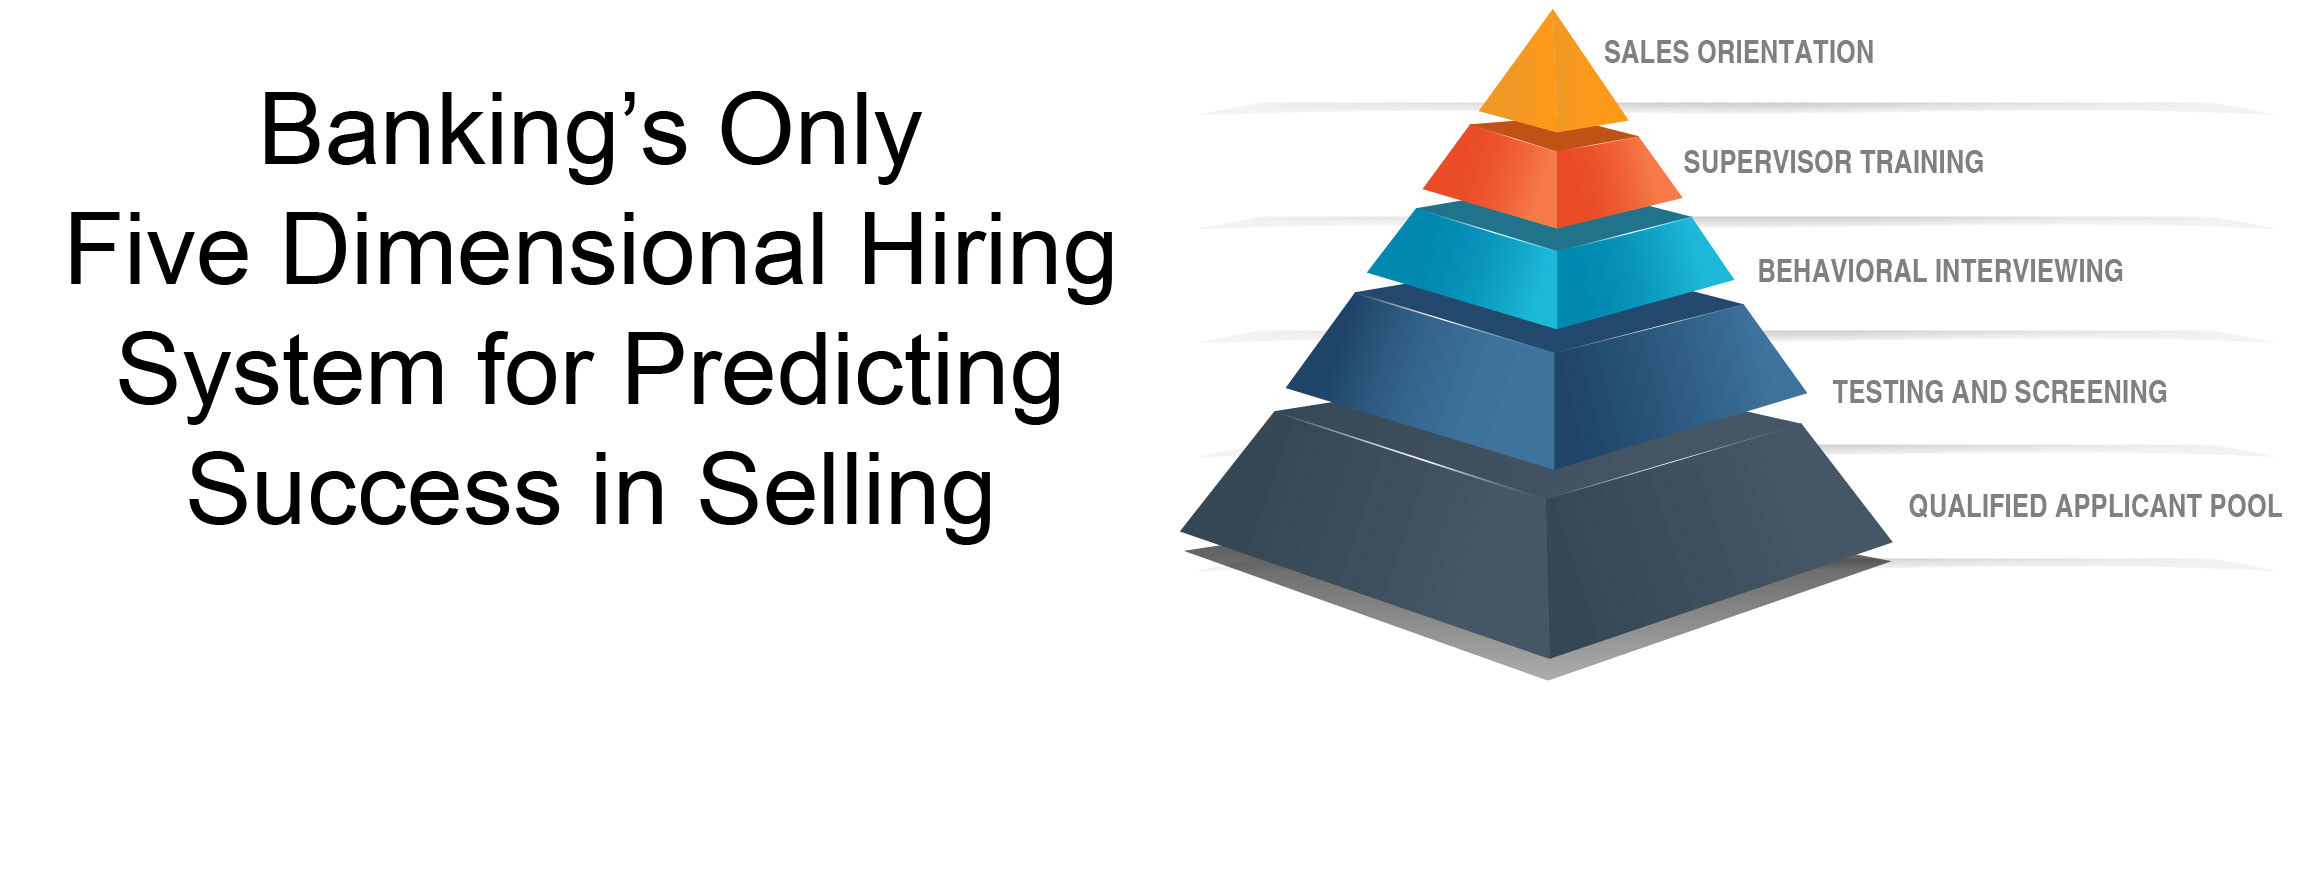 Bankings-Only-Five-Dimensional-Hiring-System-for-Predicting-Success-in-Selling-Pyramid